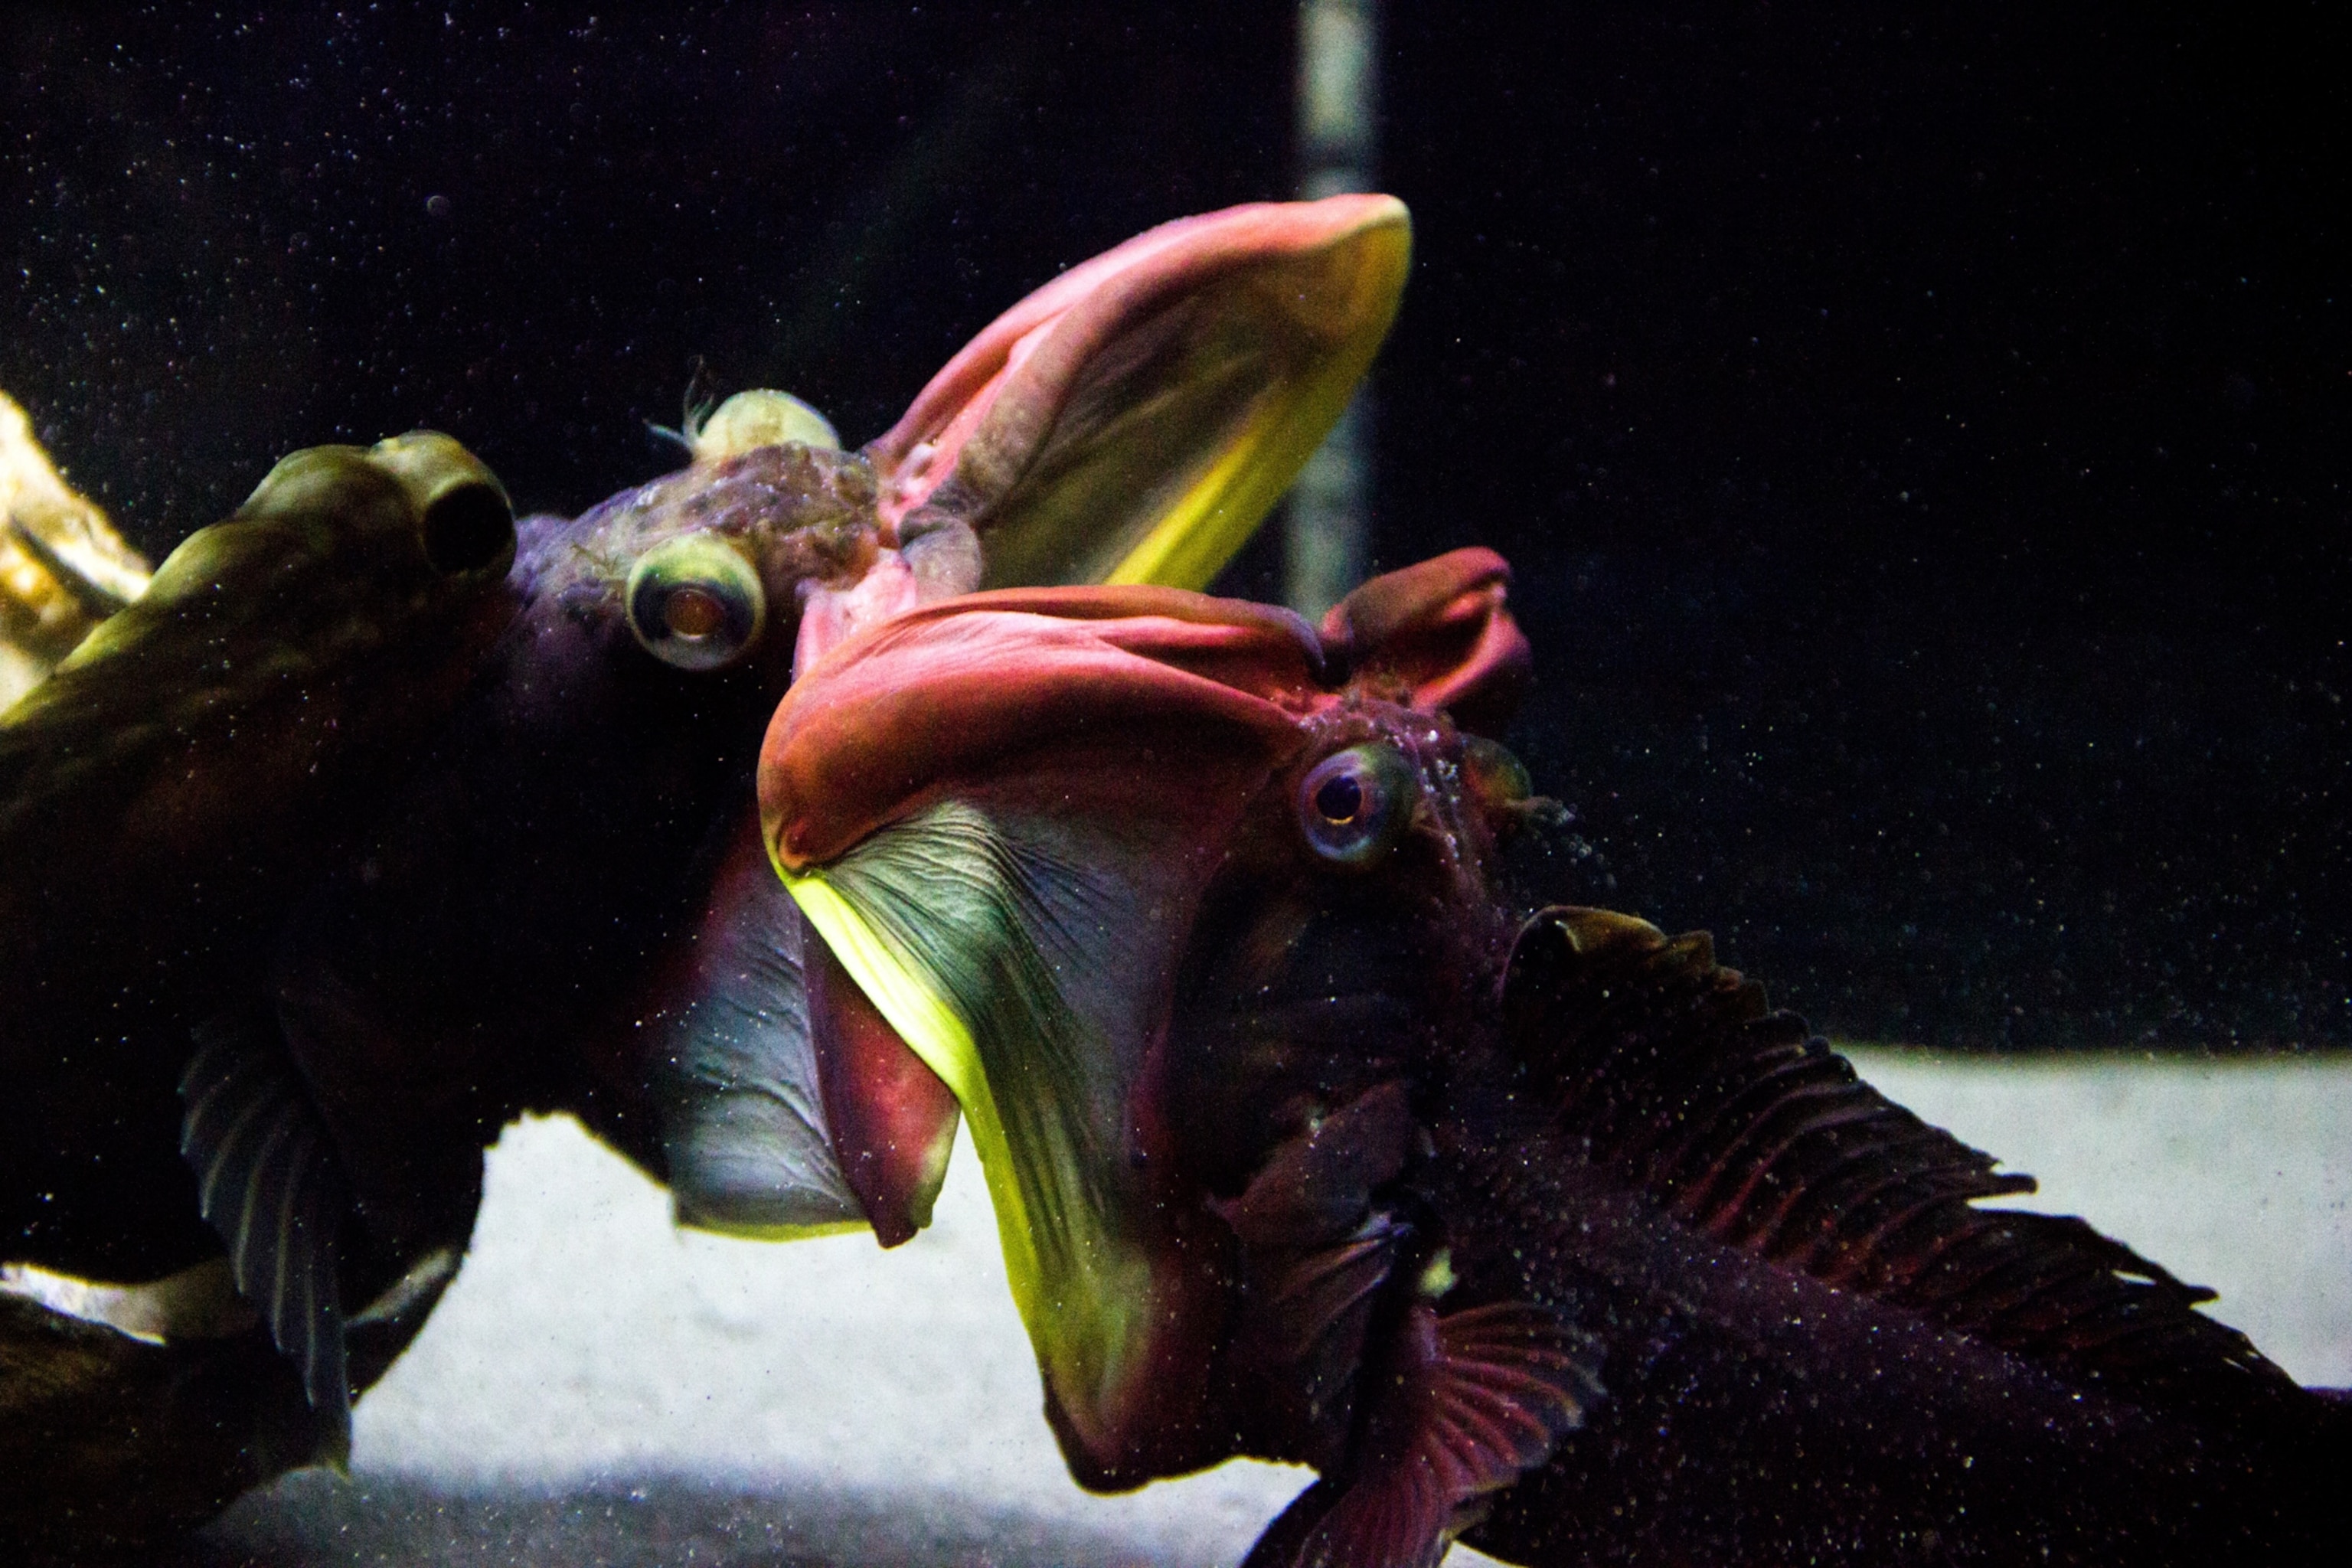 Two Sarcastic Fringeheads fight over a shelter by gaping their mouth and pushing each other before ending up biting if no one gives up.